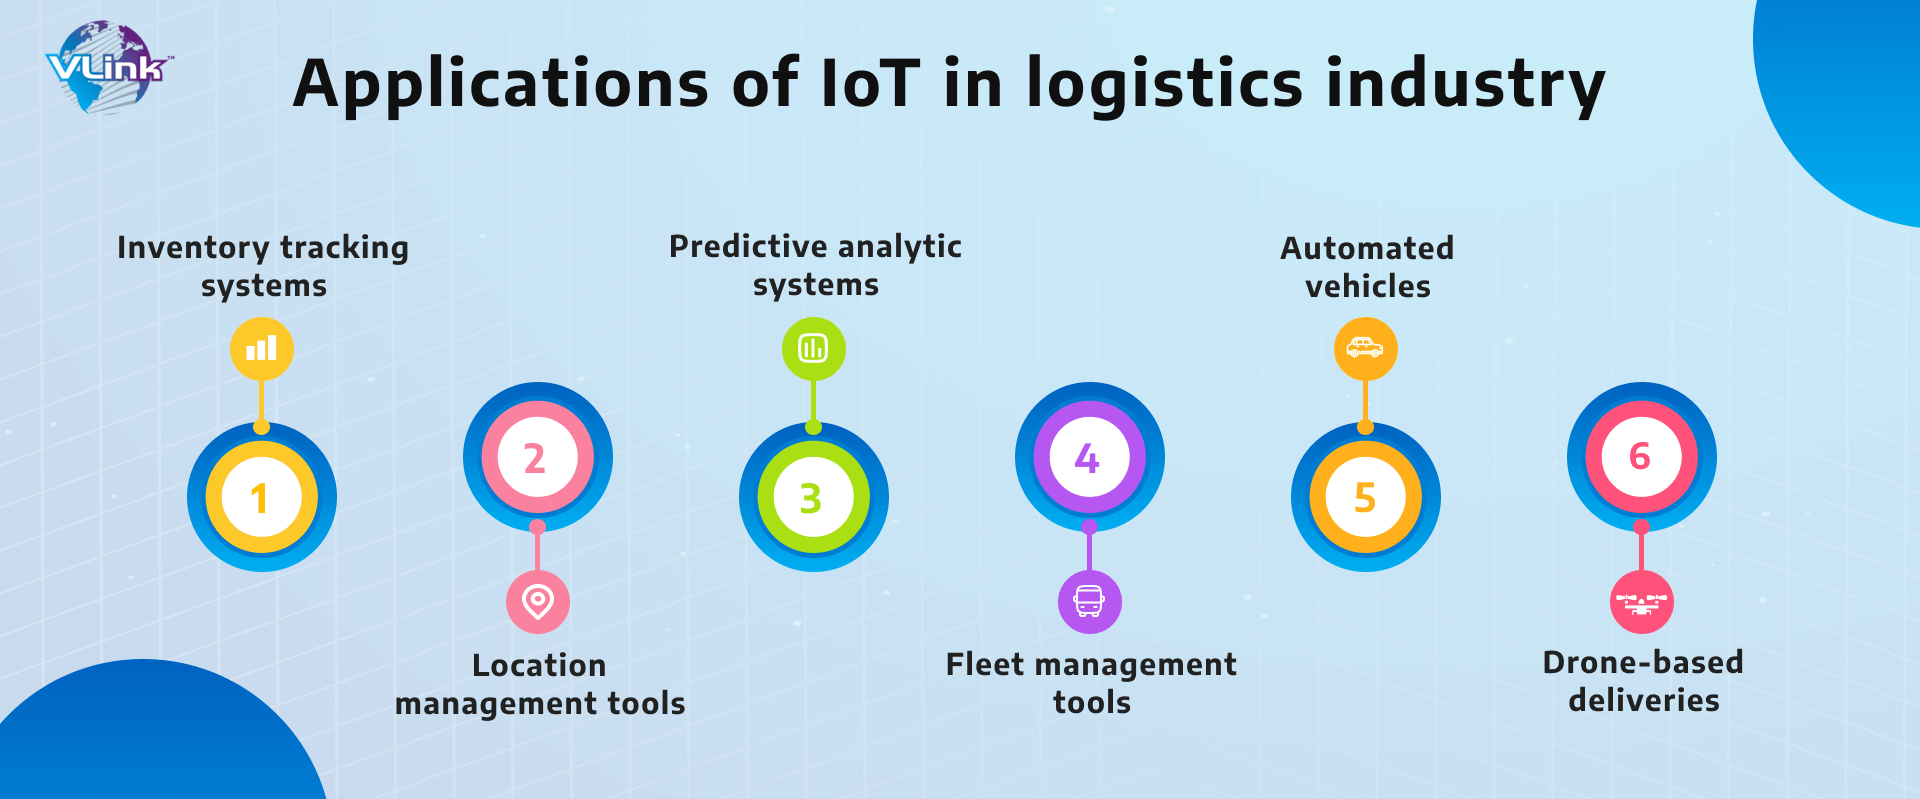 application of Iot in Logistics Industry